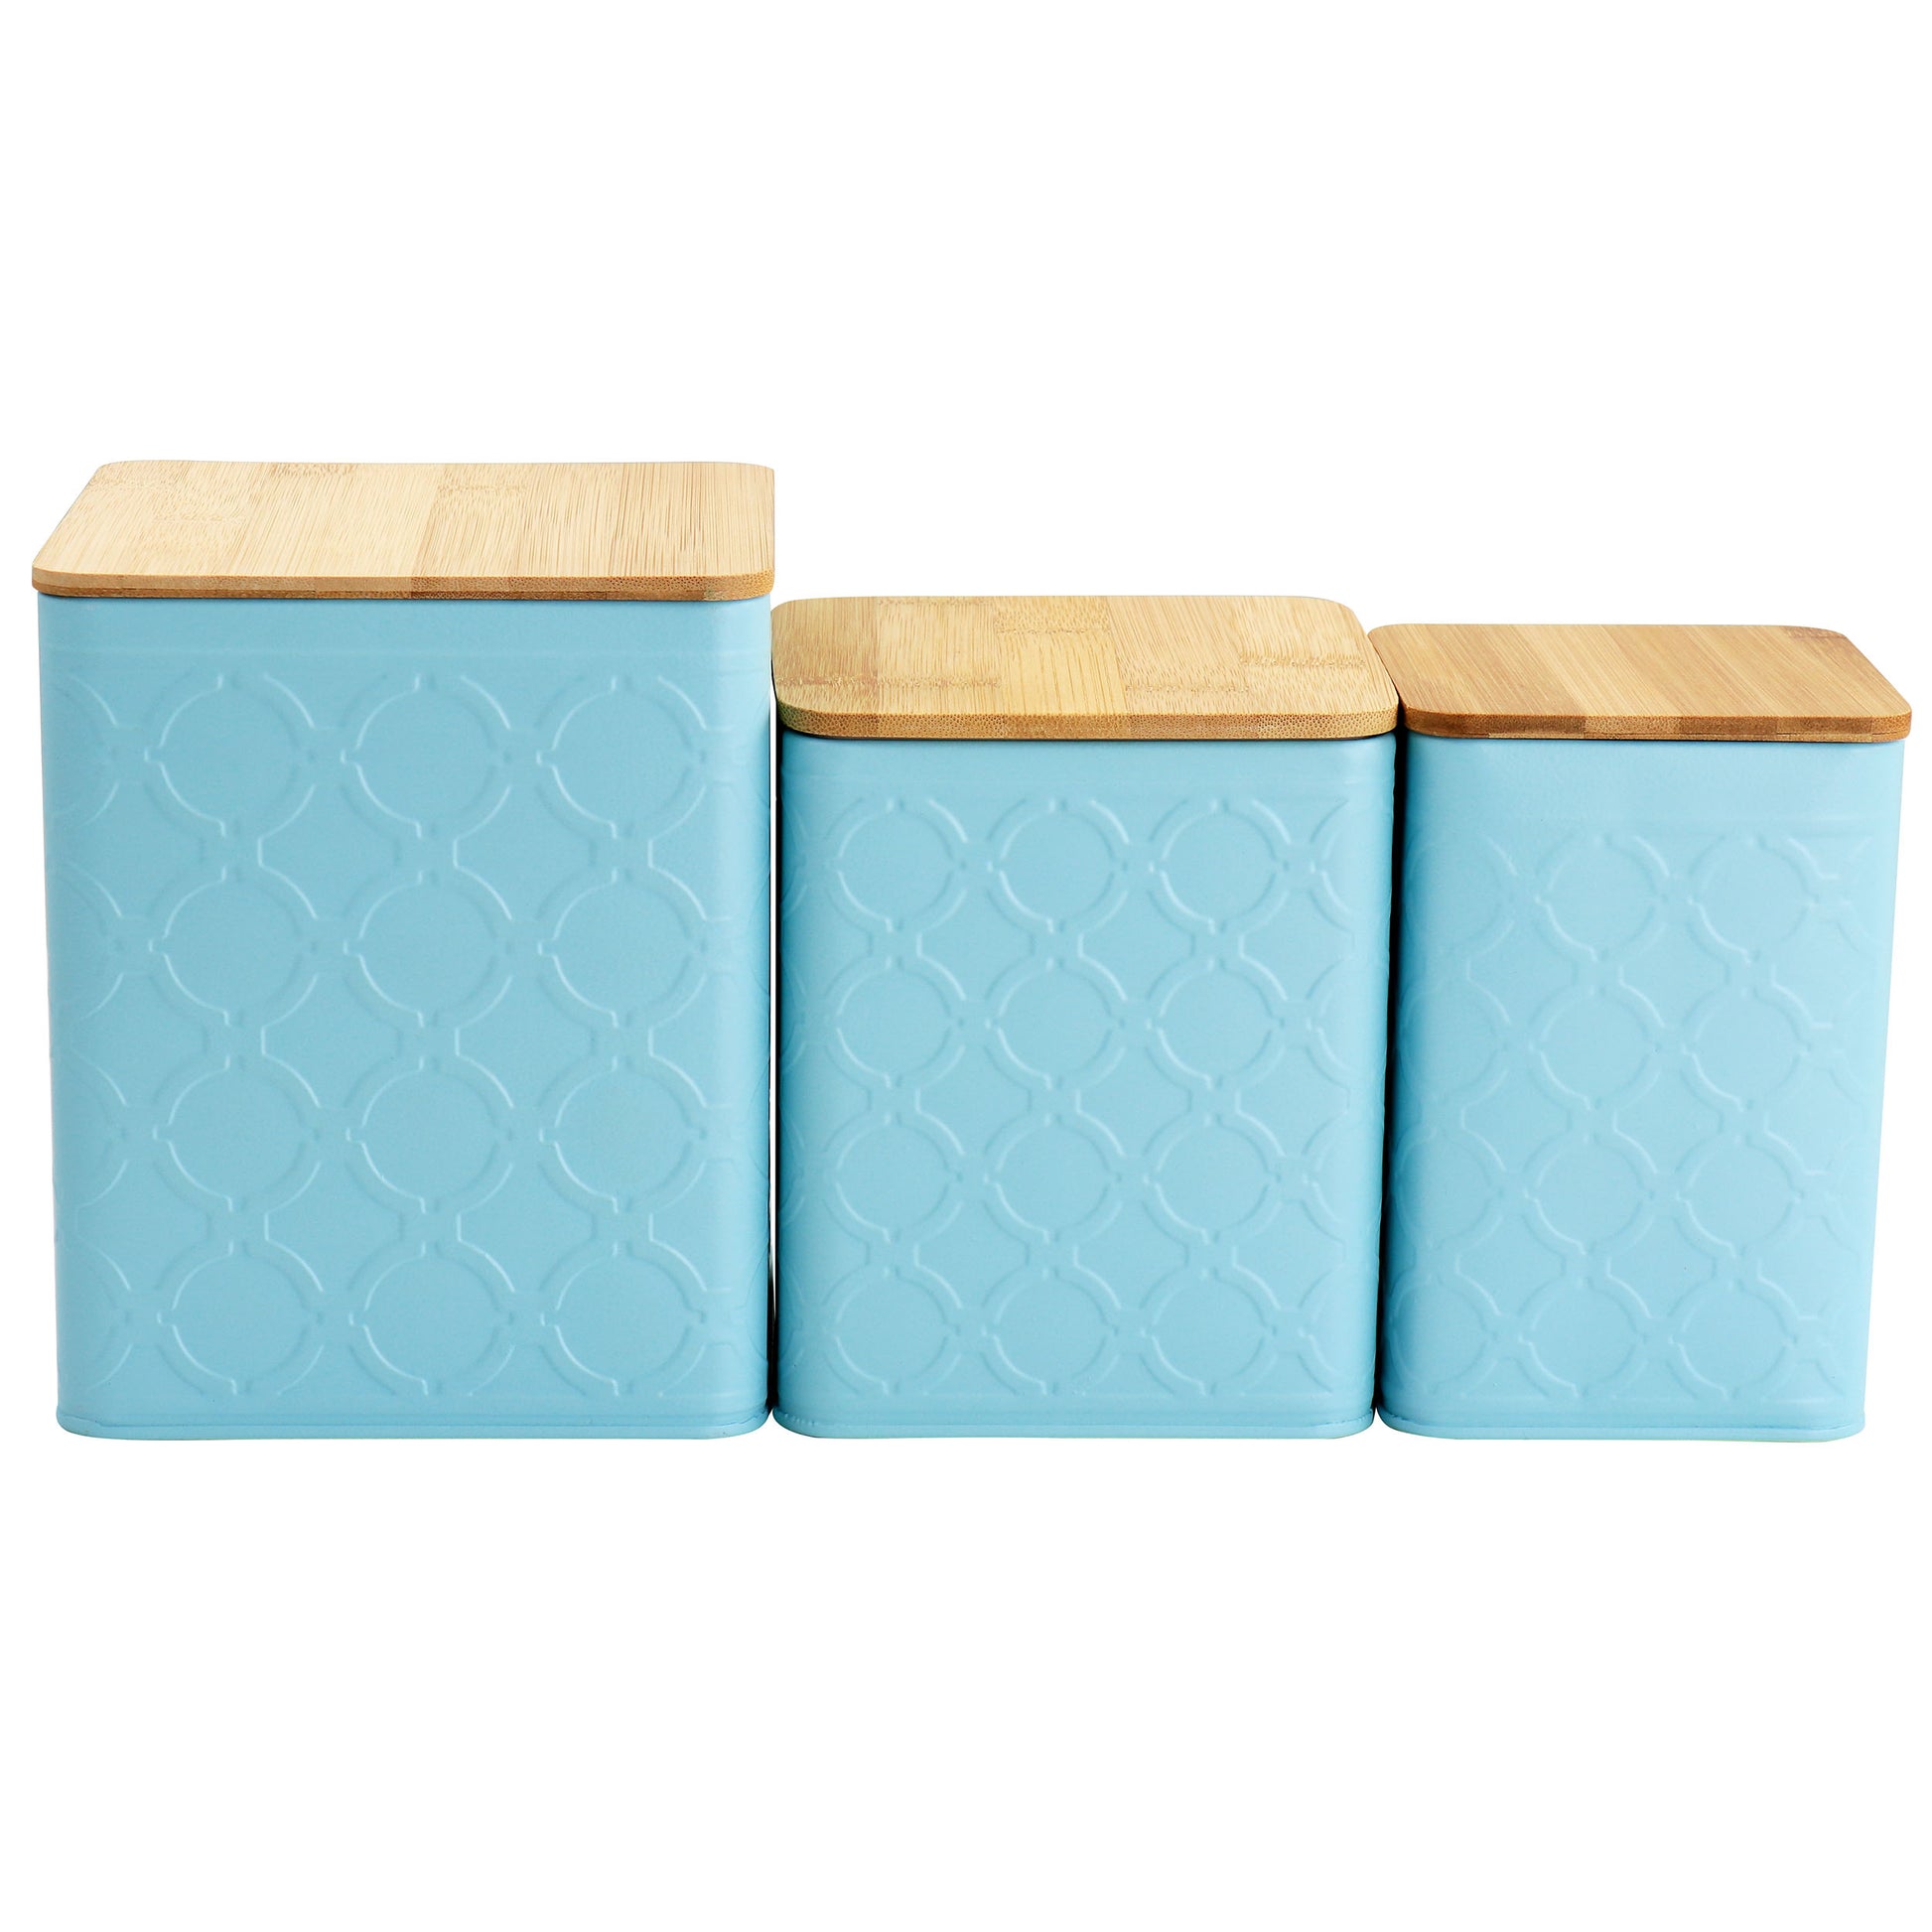 MegaChef MegaChef 3 Piece Square Iron Kitchen Canister Set with Bamboo Lids in Turquoise